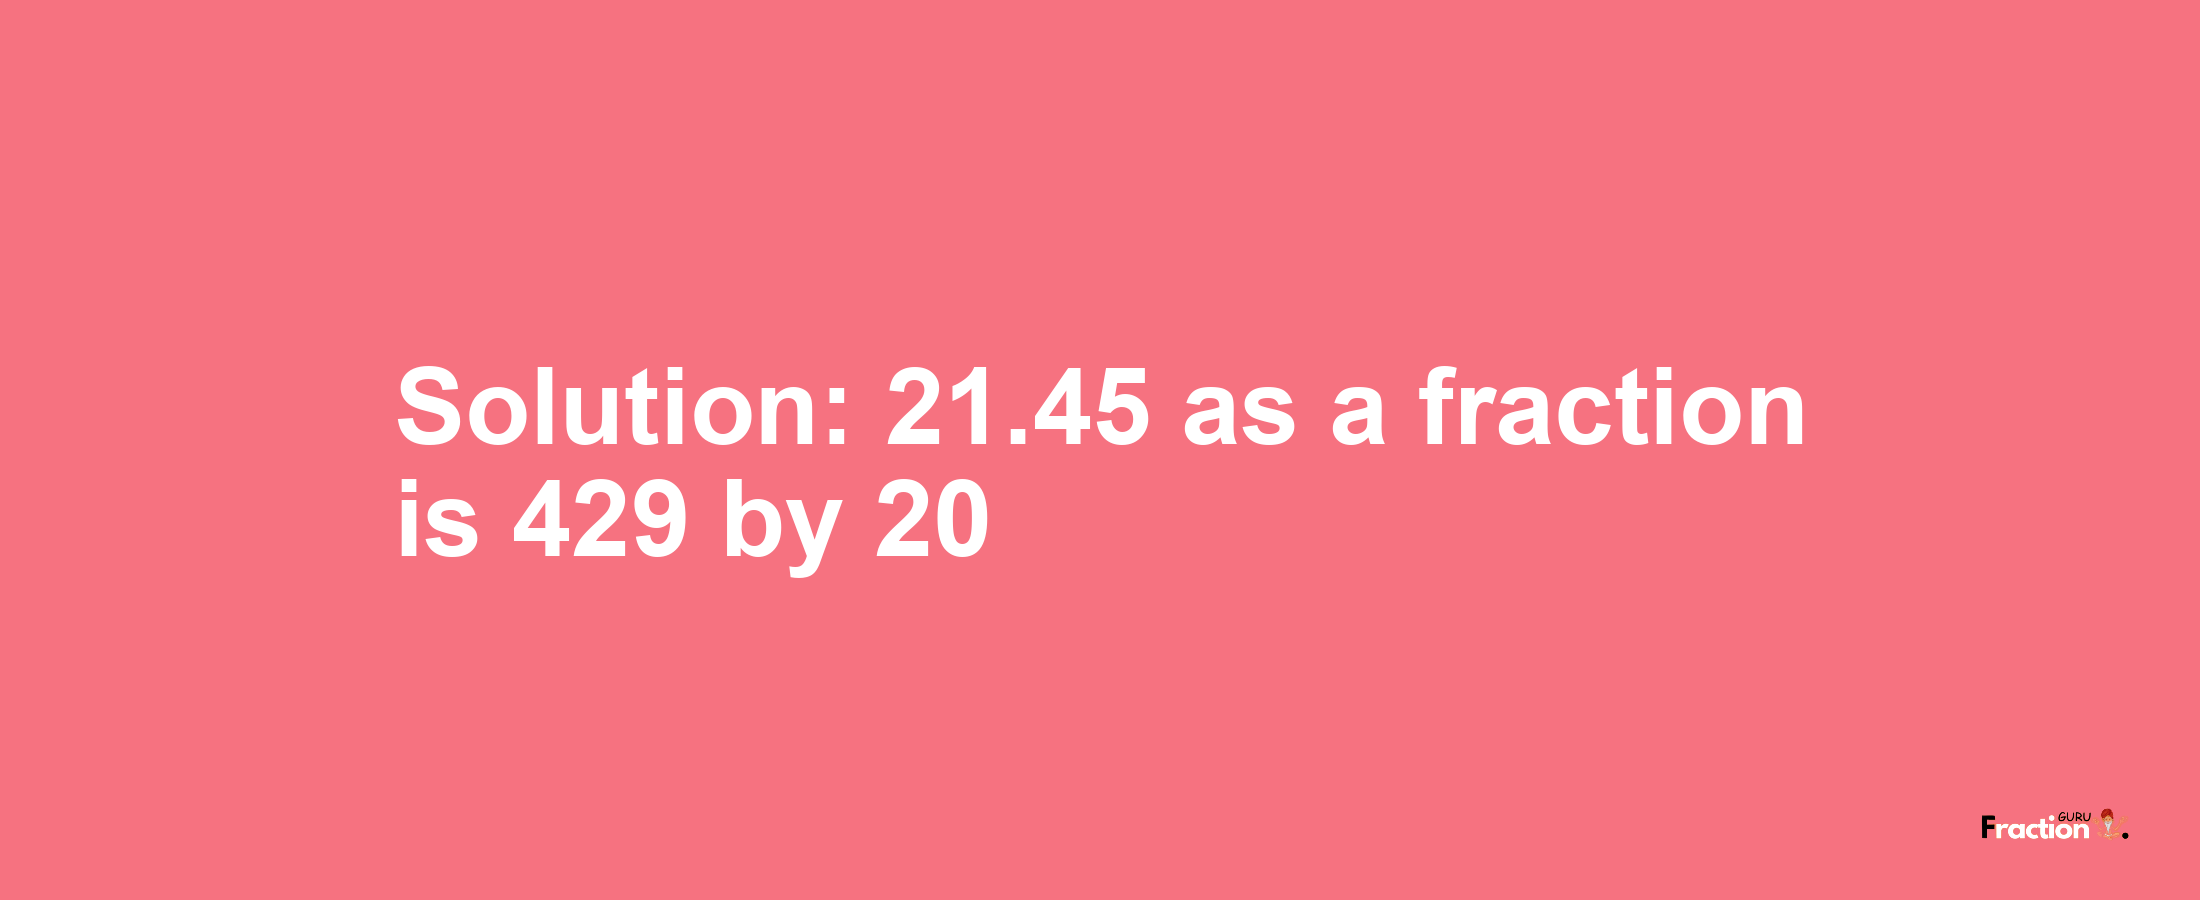 Solution:21.45 as a fraction is 429/20